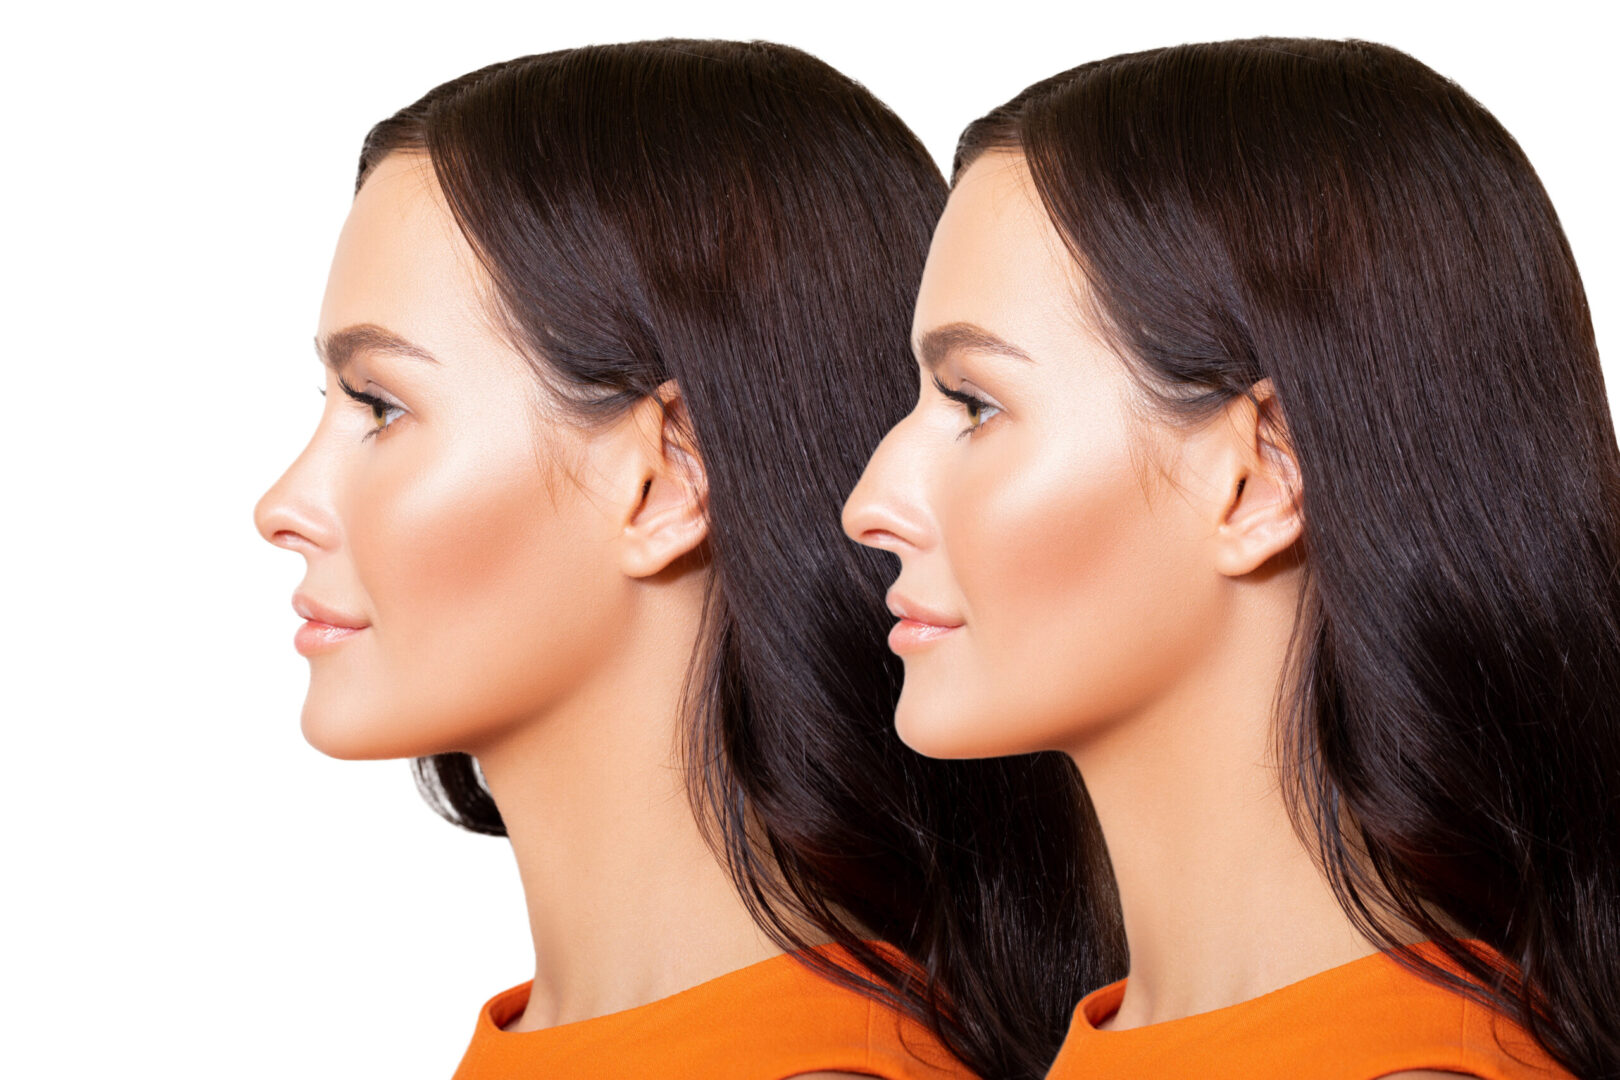 nose revision rhinoplasty to fix the shape of your nose with Aspire Surgical in Salt Lake City, UT